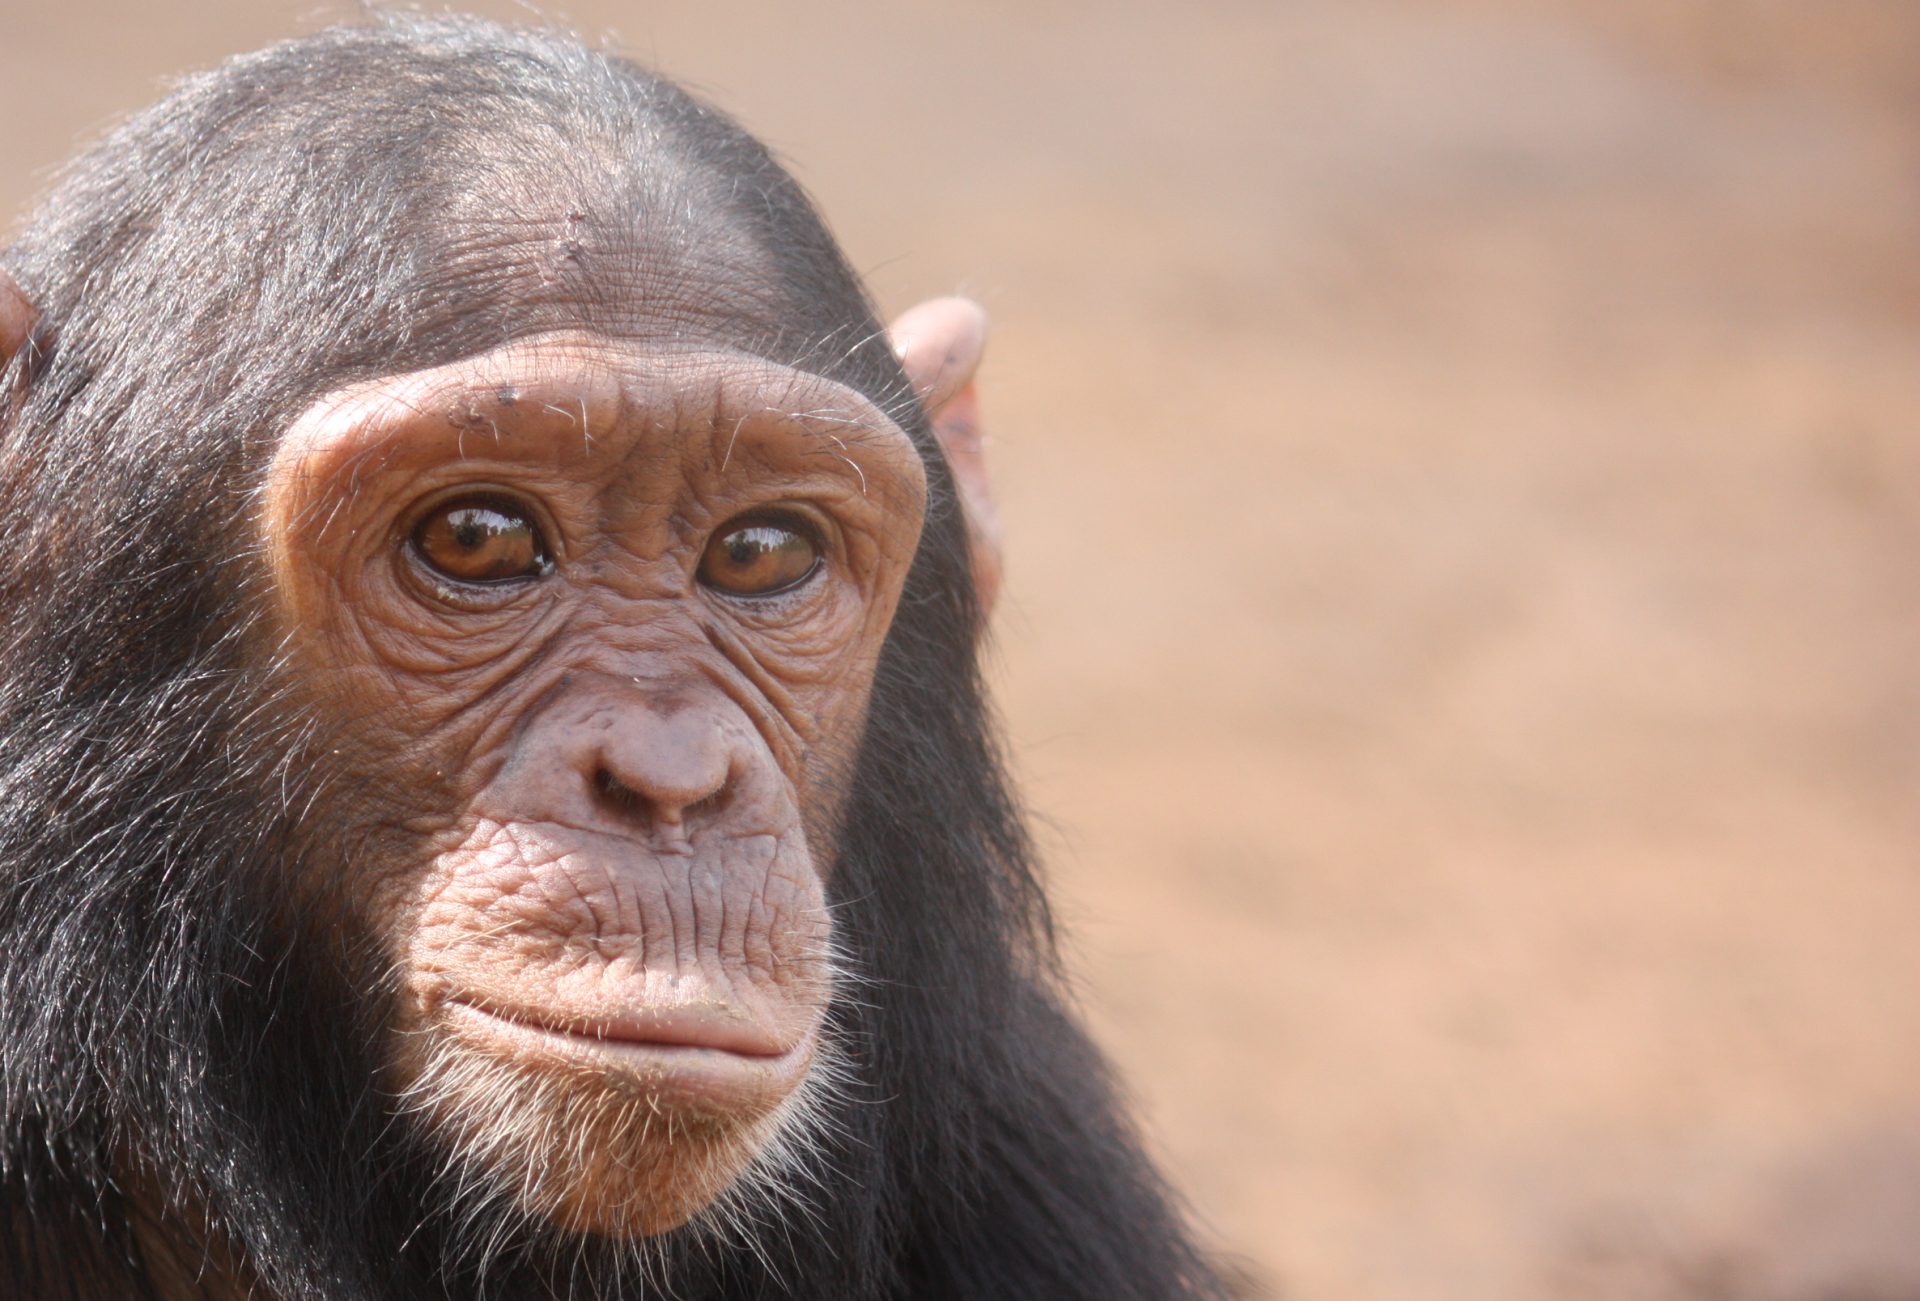 Giving Day for Apes – Water for the chimps